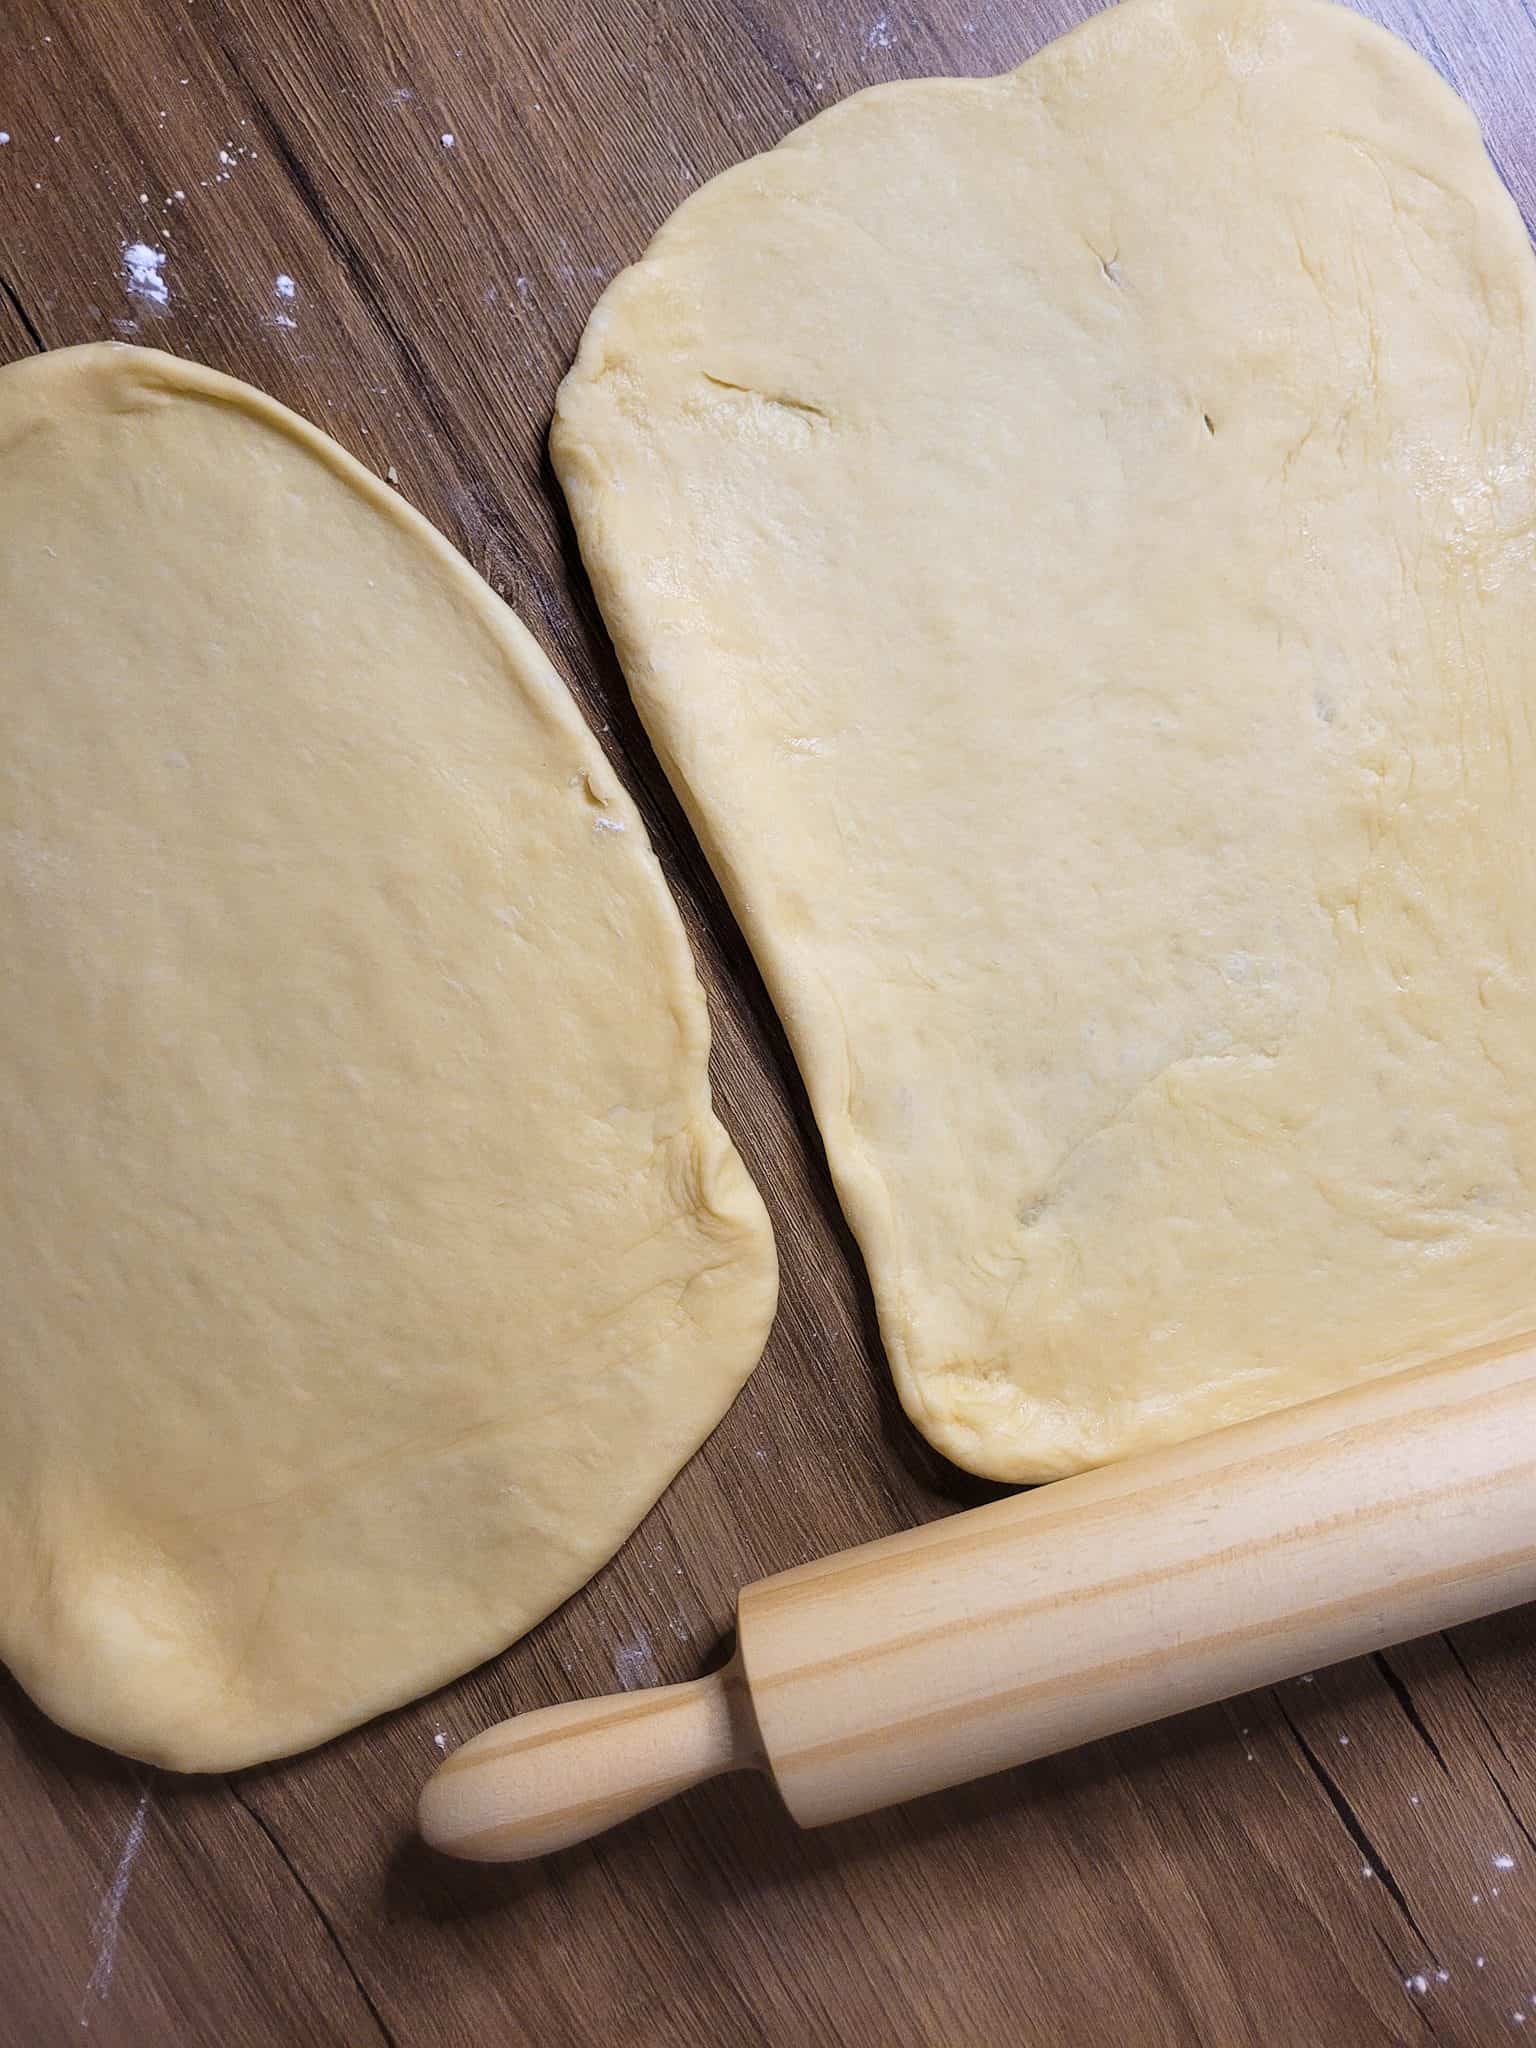 Rolled and flattened pieces of proofed dough next to a rolling pin